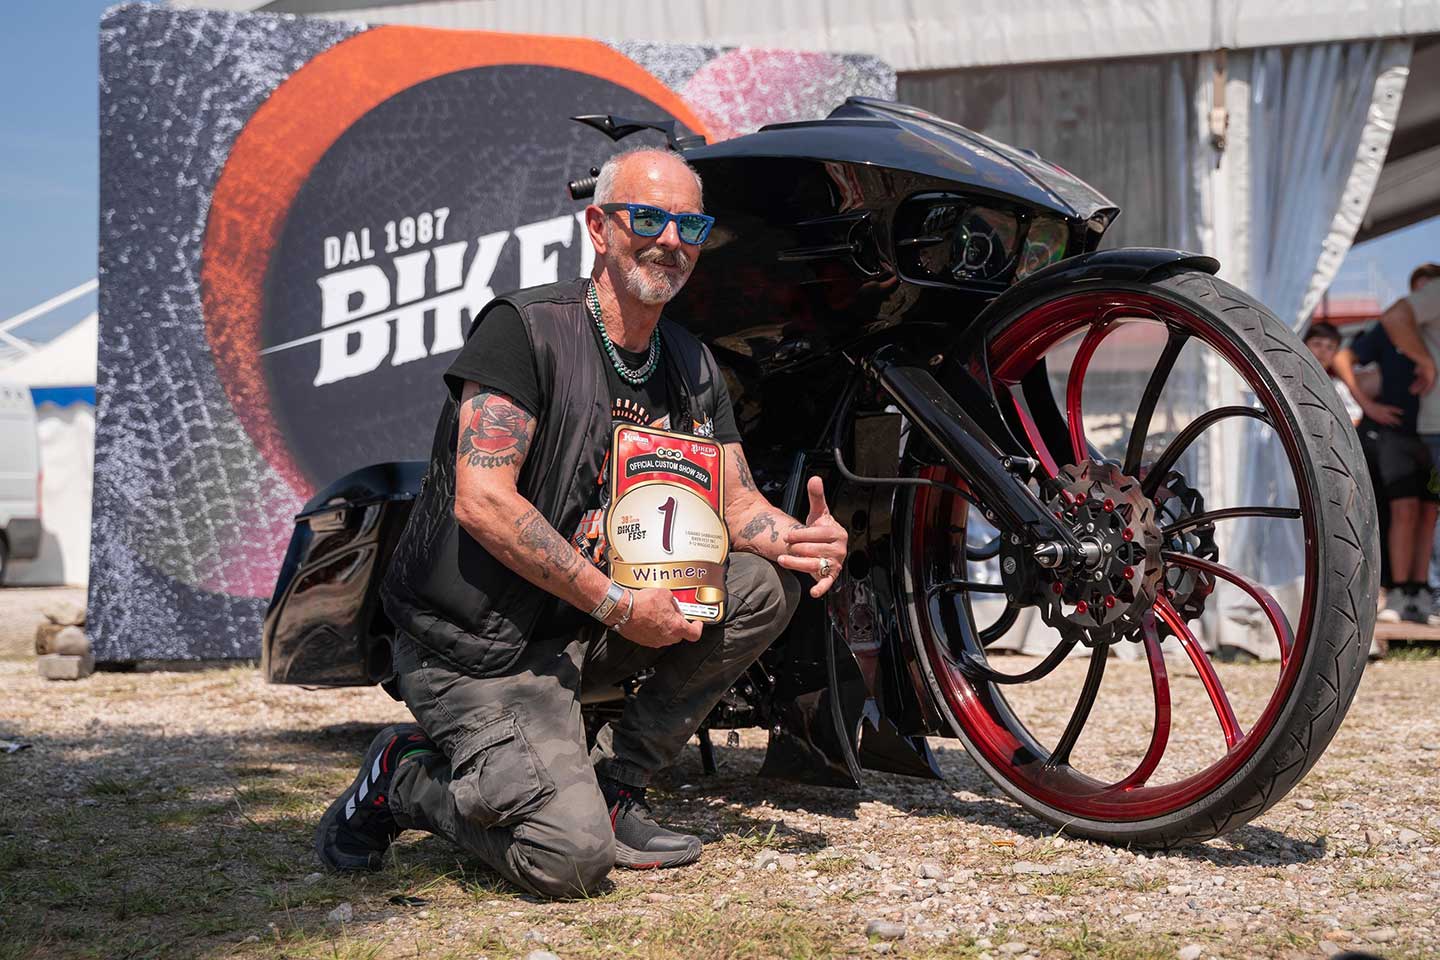 Naturally there was a bagger class, and grabbing the top hardware this year was this slammed, big-wheel Harley from Asso Special Bike Garage.